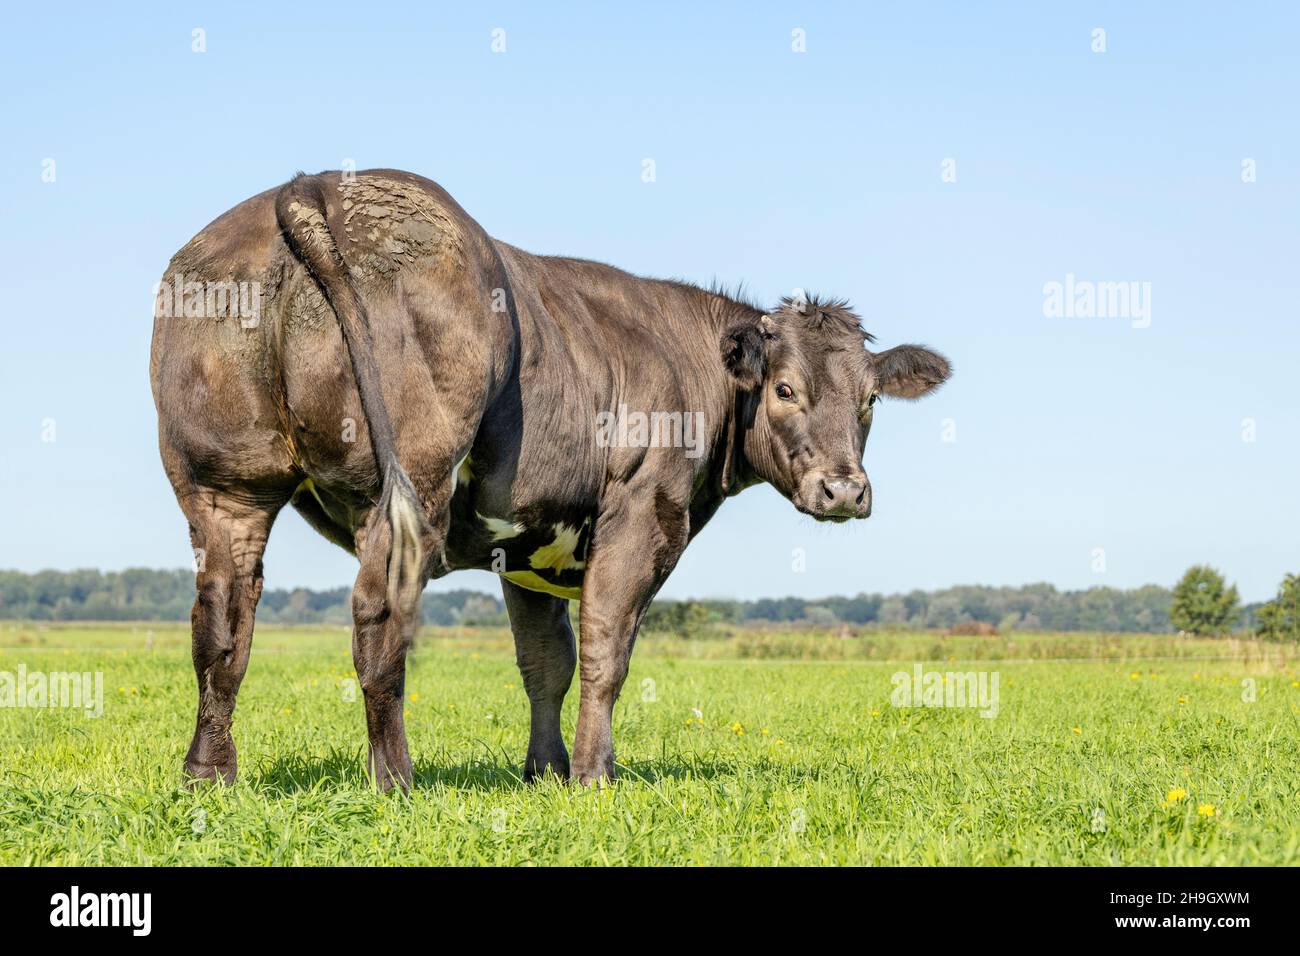 Black beef cow from behind, large buttocks, looking backwards in a green field, under a blue sky Stock Photo